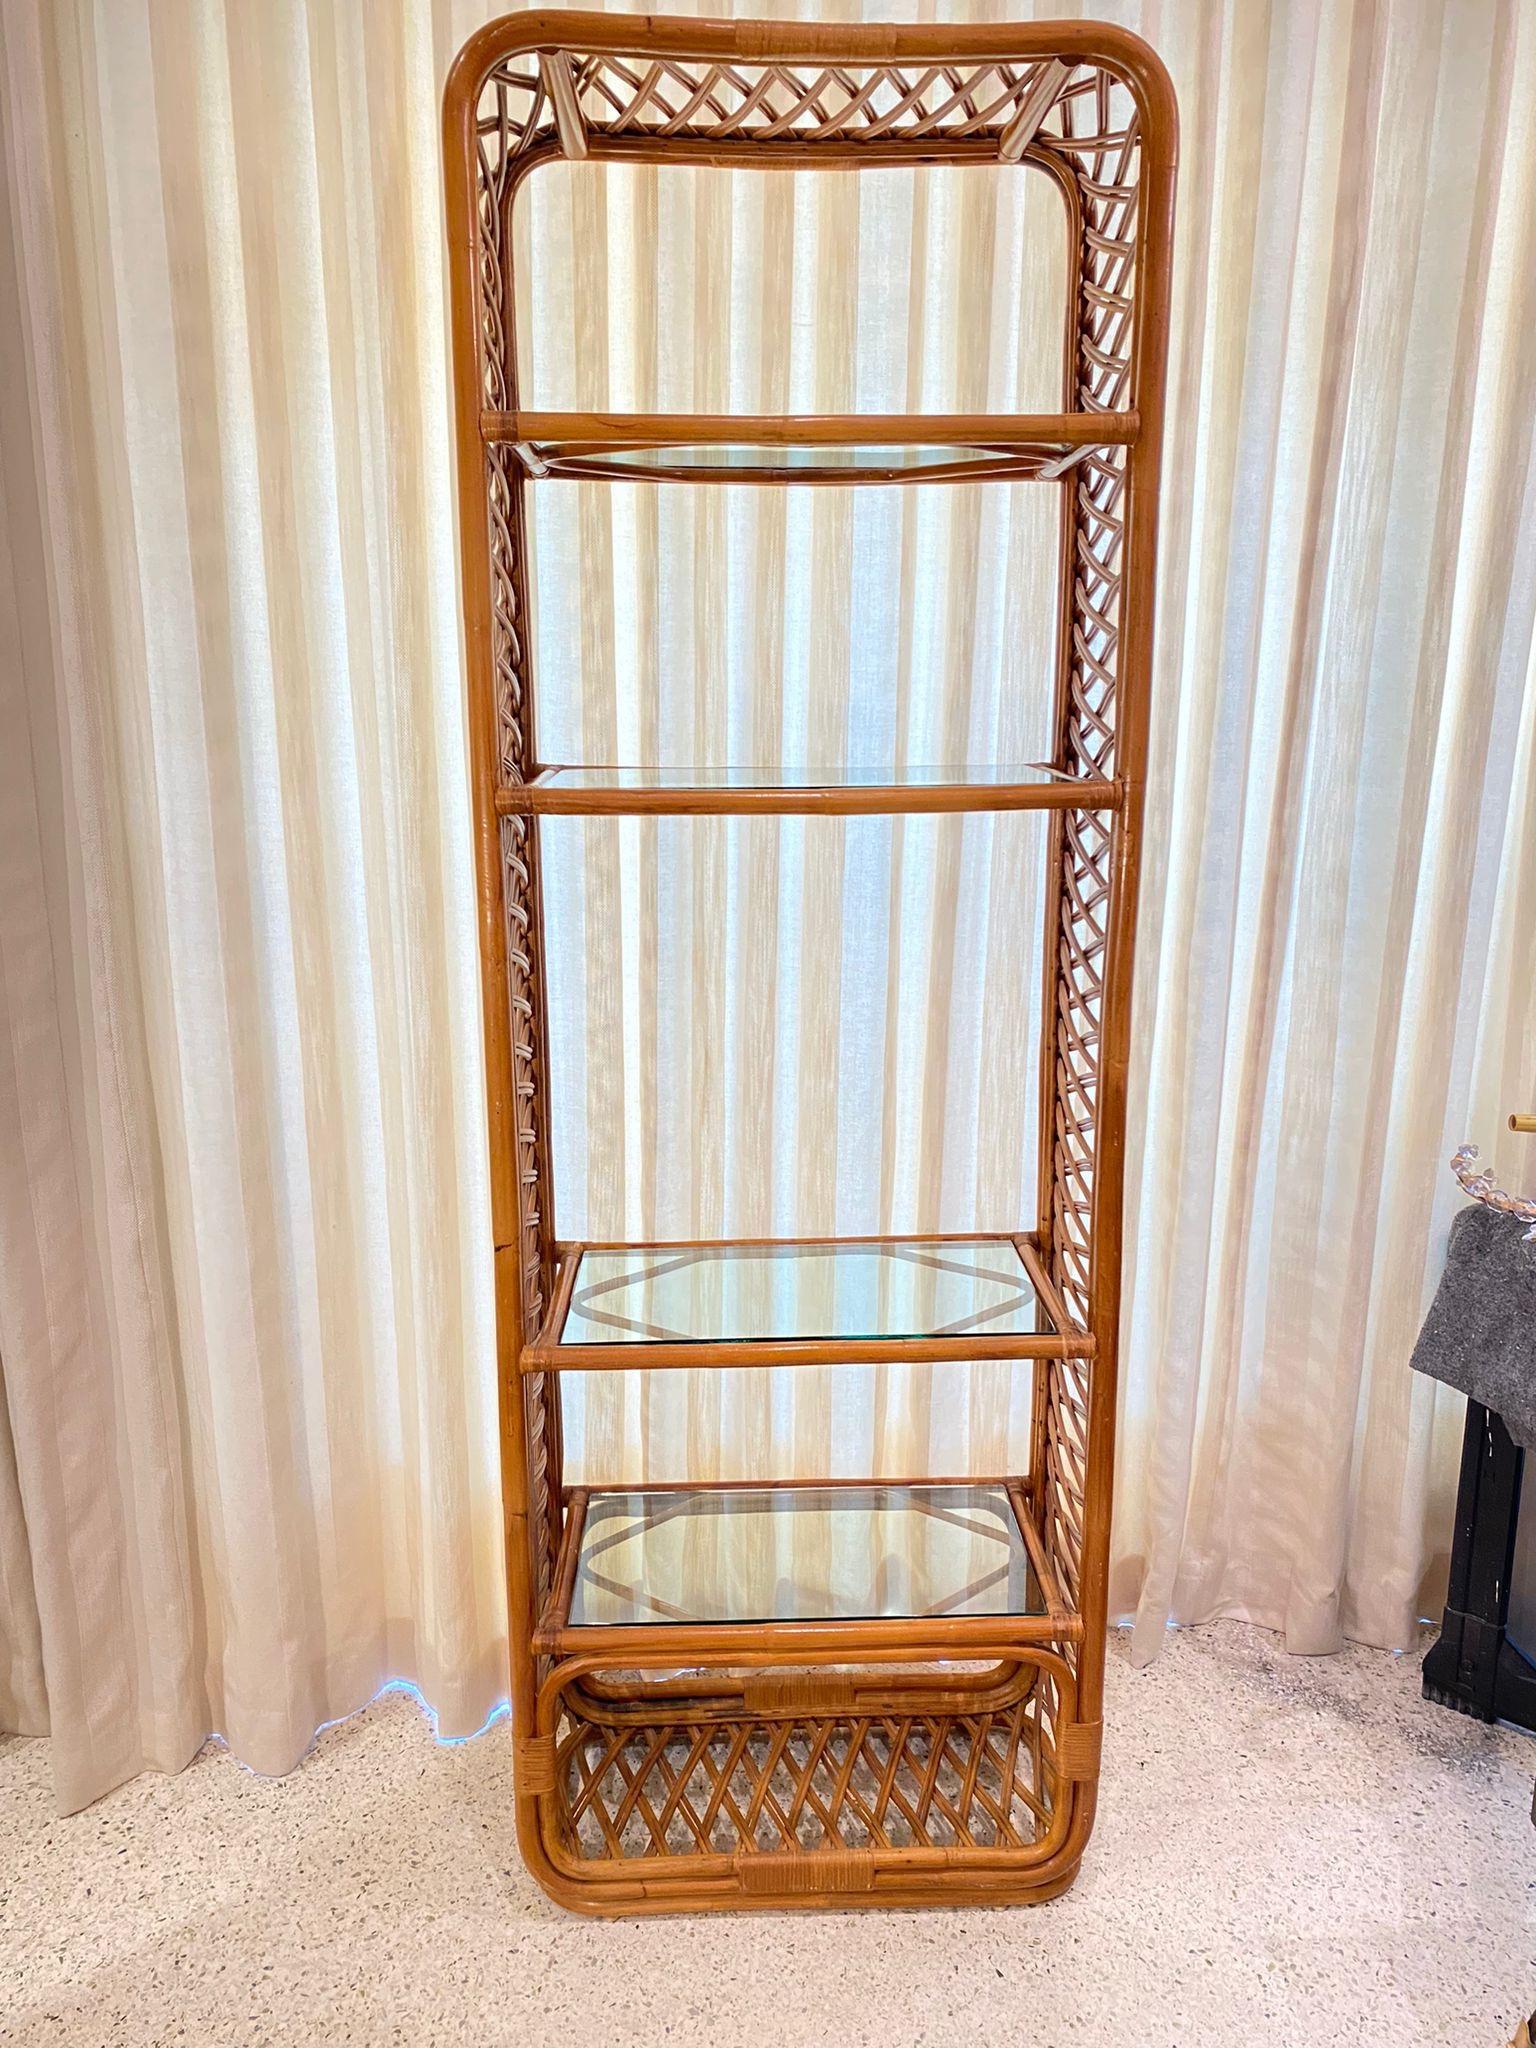 Vintage Lattice Style Bamboo & Rattan Etagere In Good Condition For Sale In East Hampton, NY